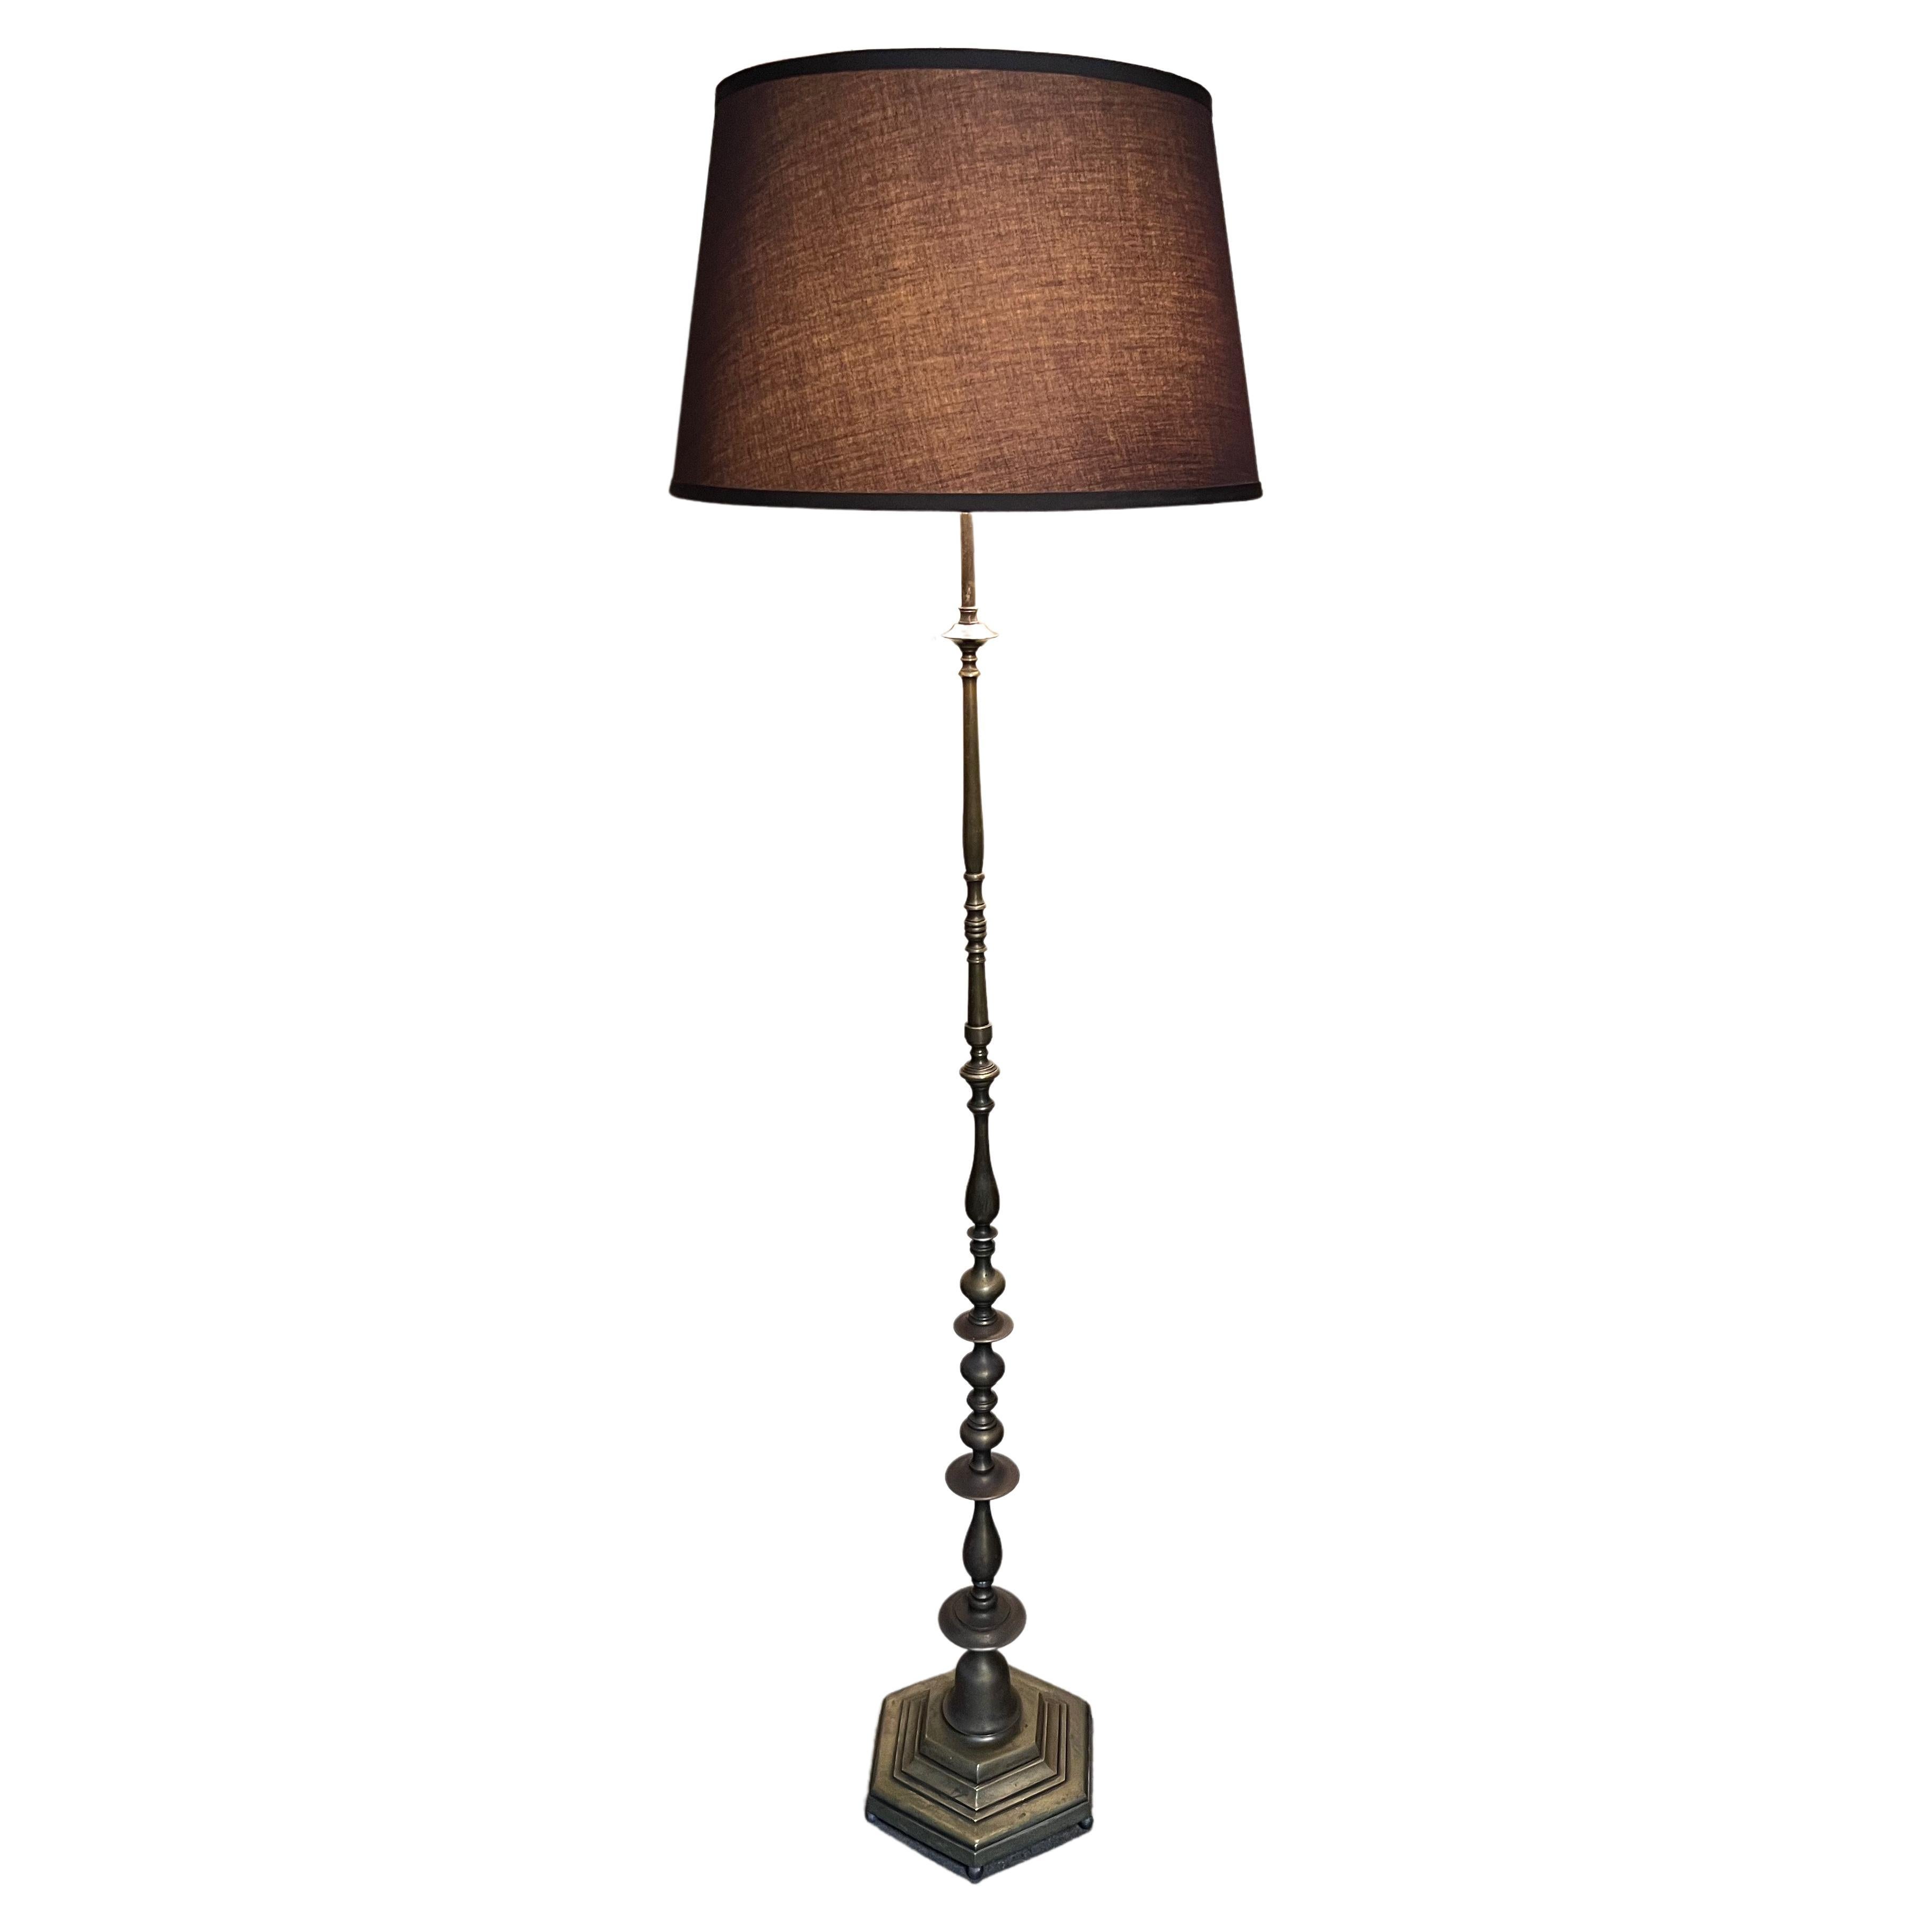 French 1940's Brass & Bronze Floor Lamp with Hand Finished Patina